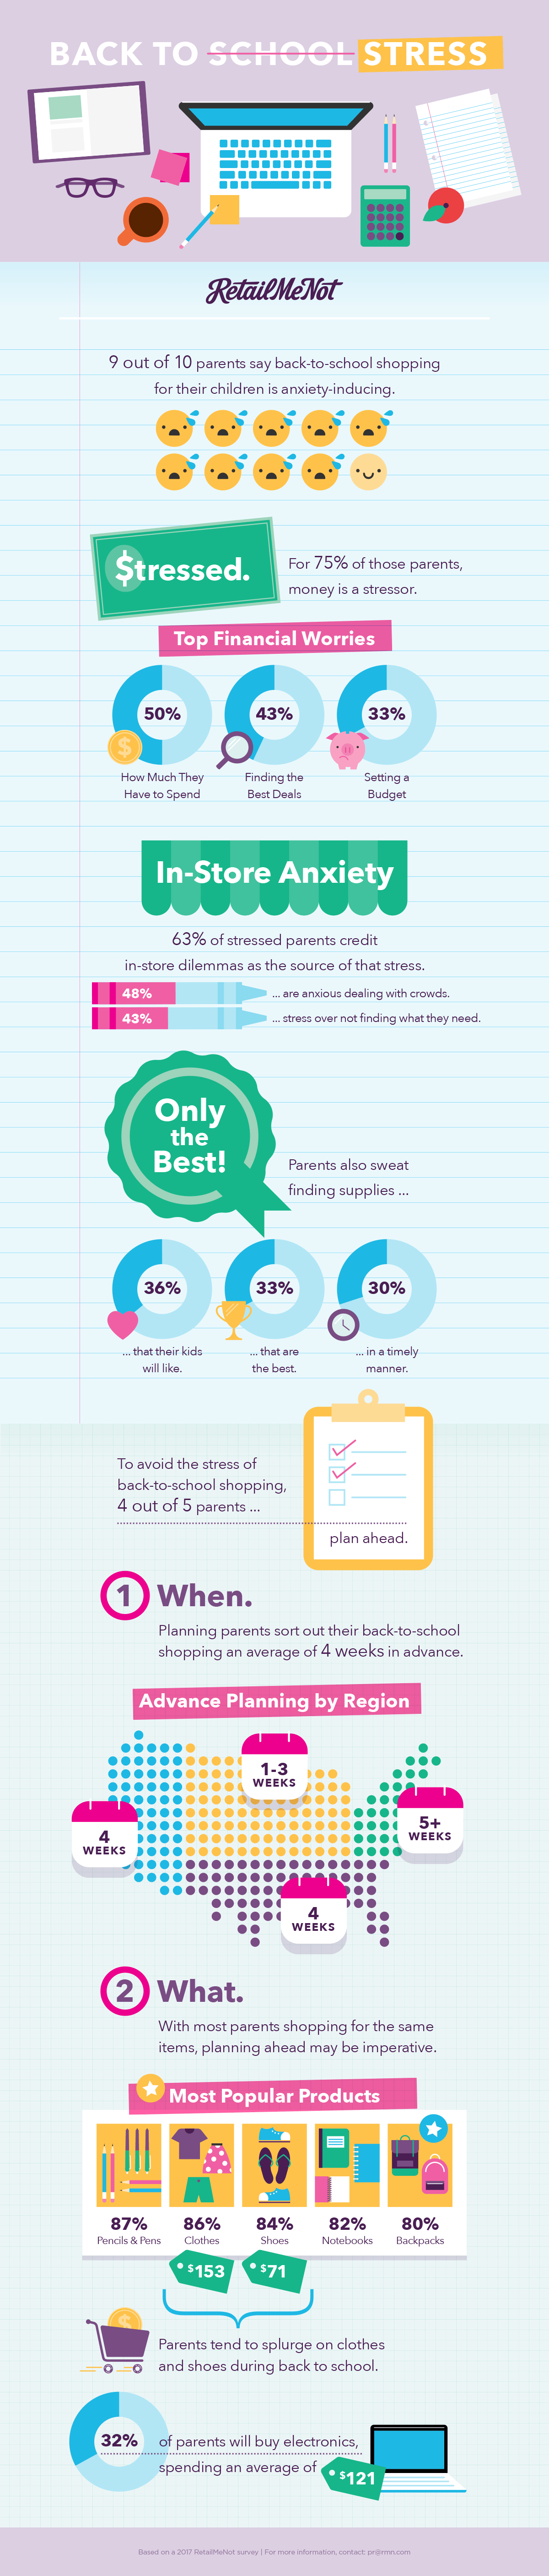 Back to School Stress Infographic